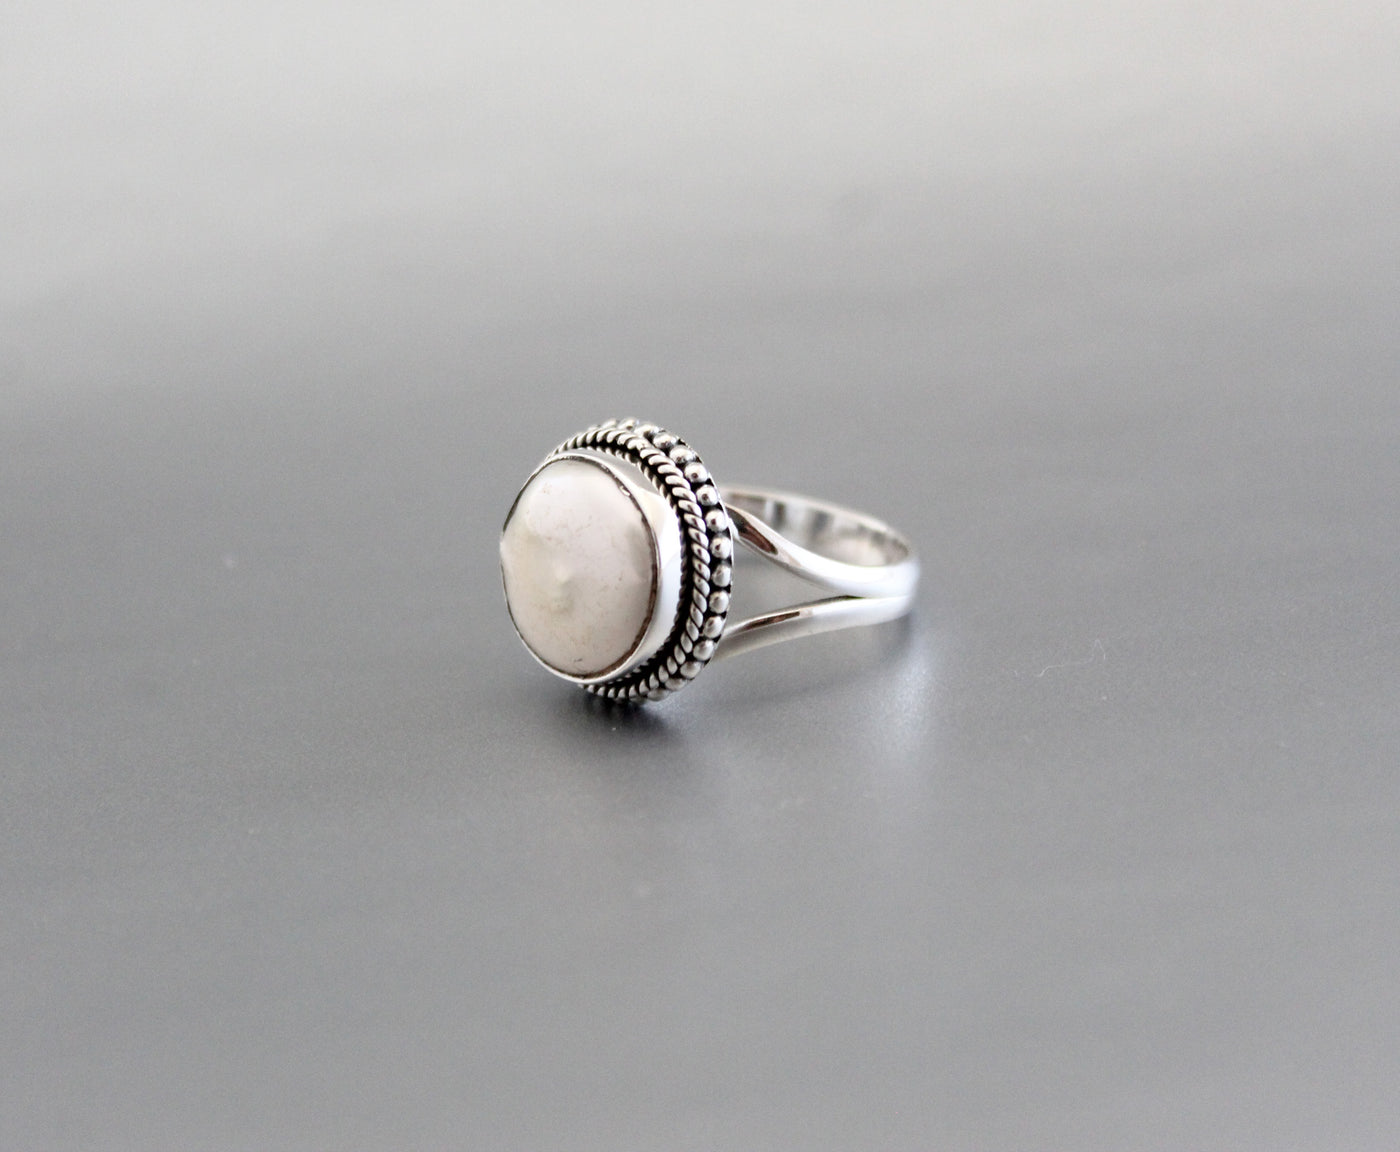 Pearl Ring Solid Silver ring Handmade Ring Stackable Ring Minimalist Ring Dainty Ring Natural Pearl Ring Statement Organic Boho